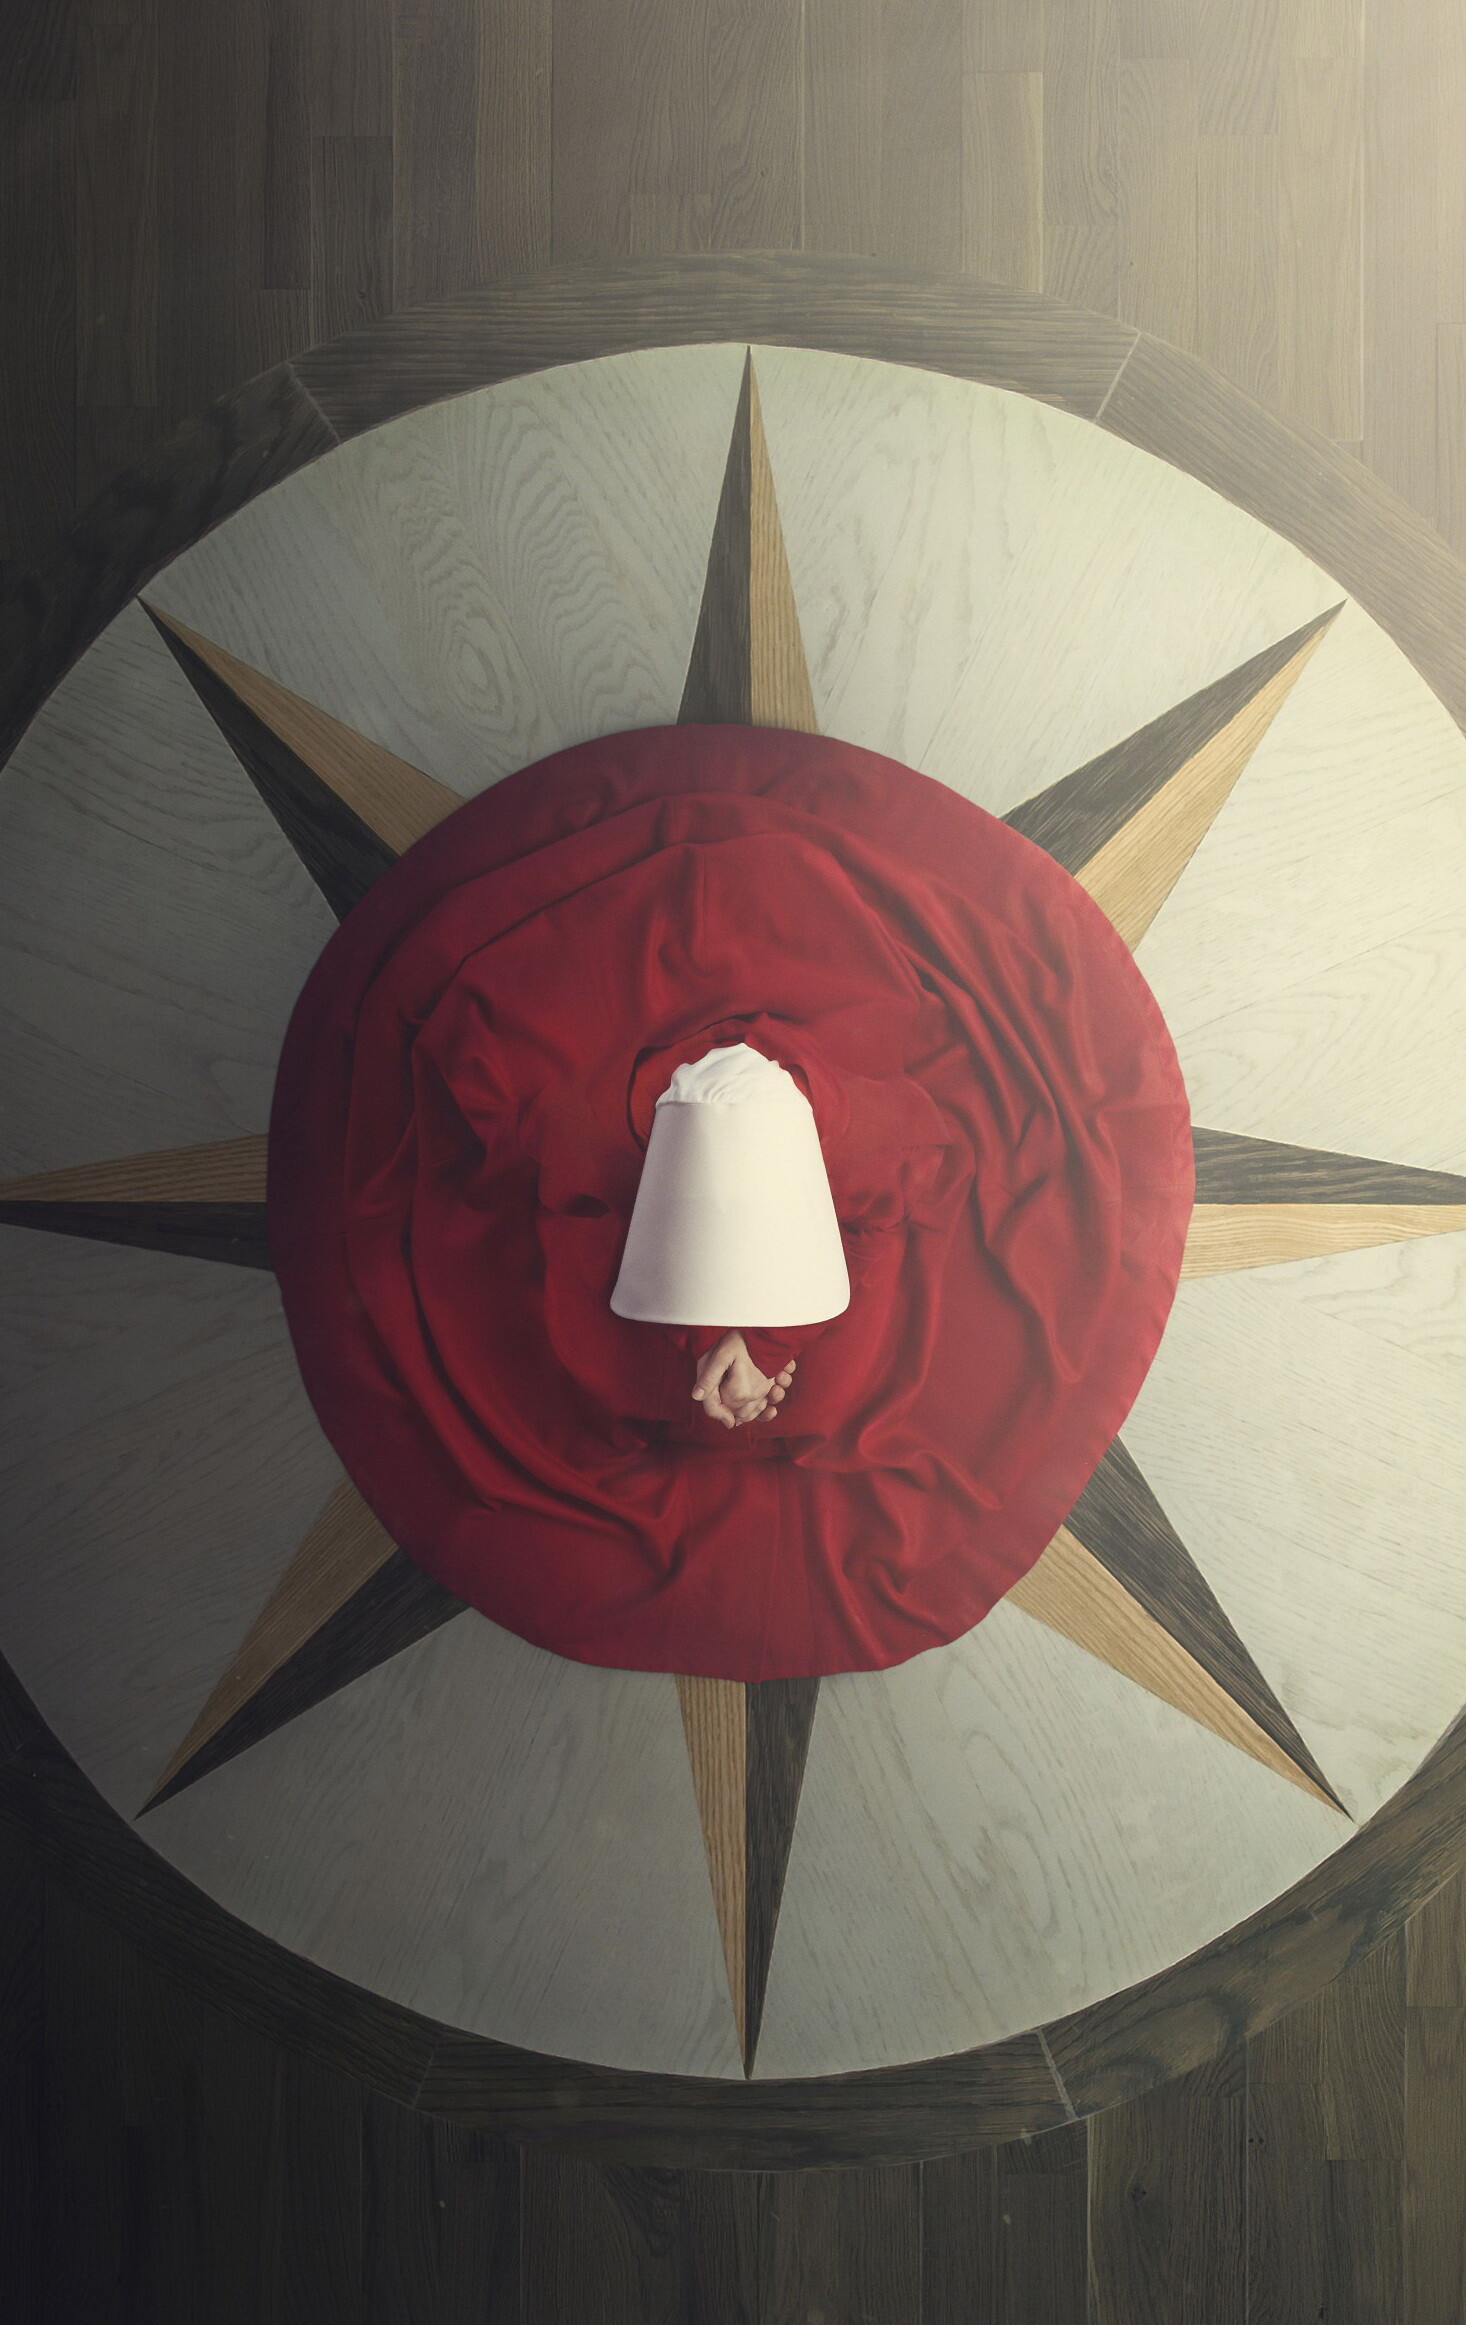 The Handmaid's Tale: The story of life in the dystopia of Gilead, a totalitarian society. 1470x2330 HD Wallpaper.